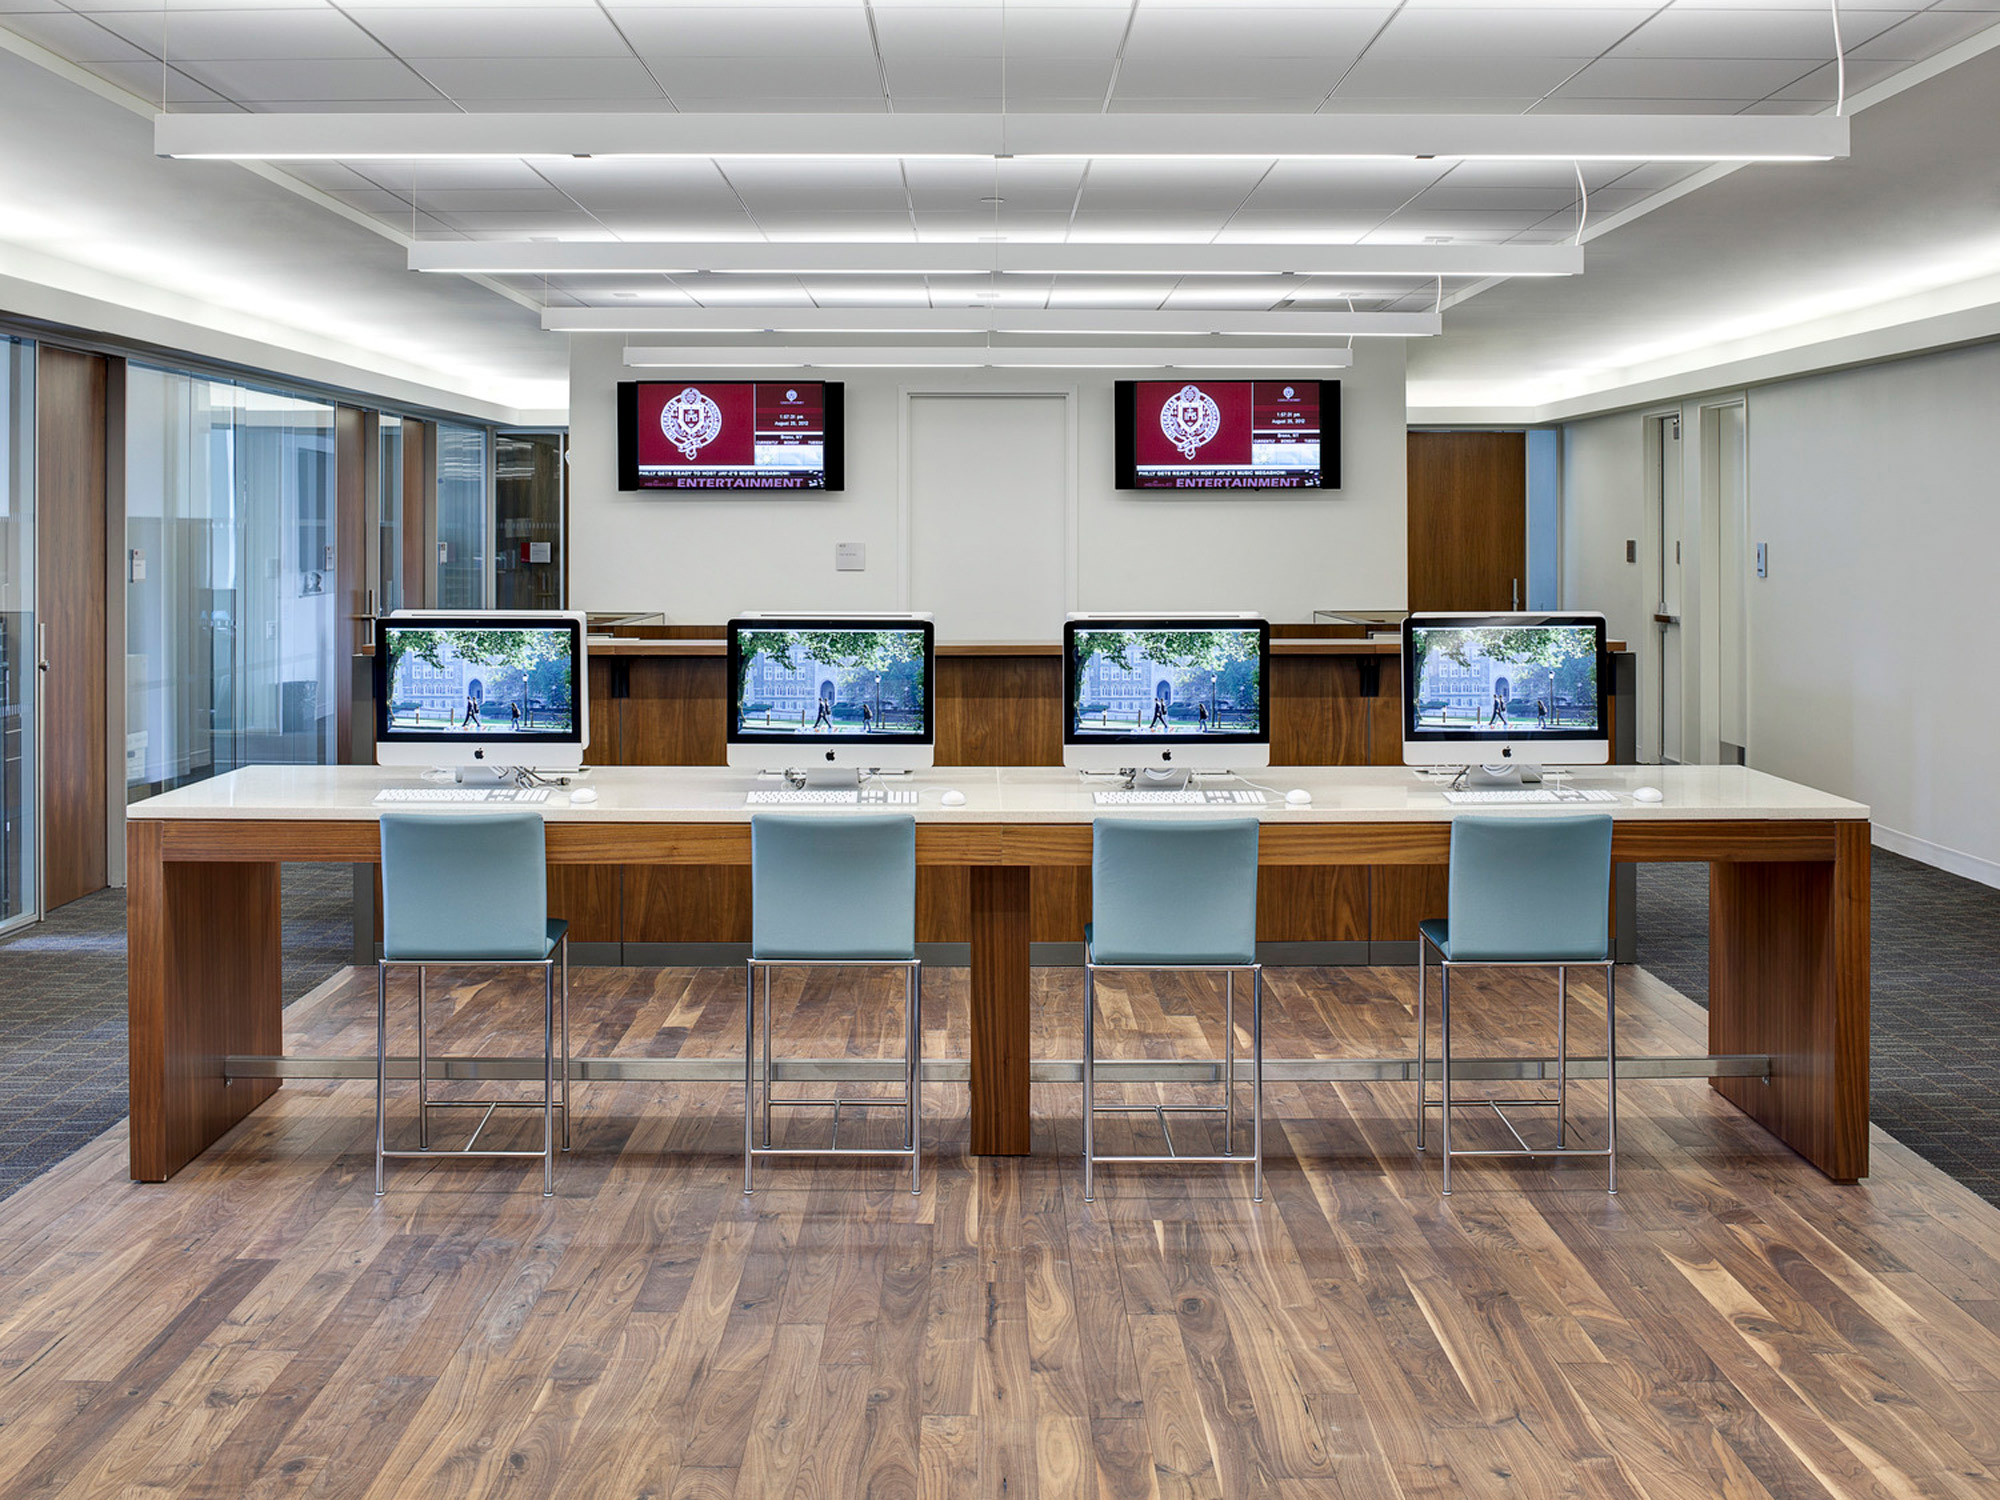 Contemporary office interior featuring a cluster of four desk stations with teal chairs, set against a wood floor, flanked by dual flat-screen monitors and underlined by sleek, recessed lighting in a drop ceiling design. A logo-emblazoned wall serves as the backdrop.